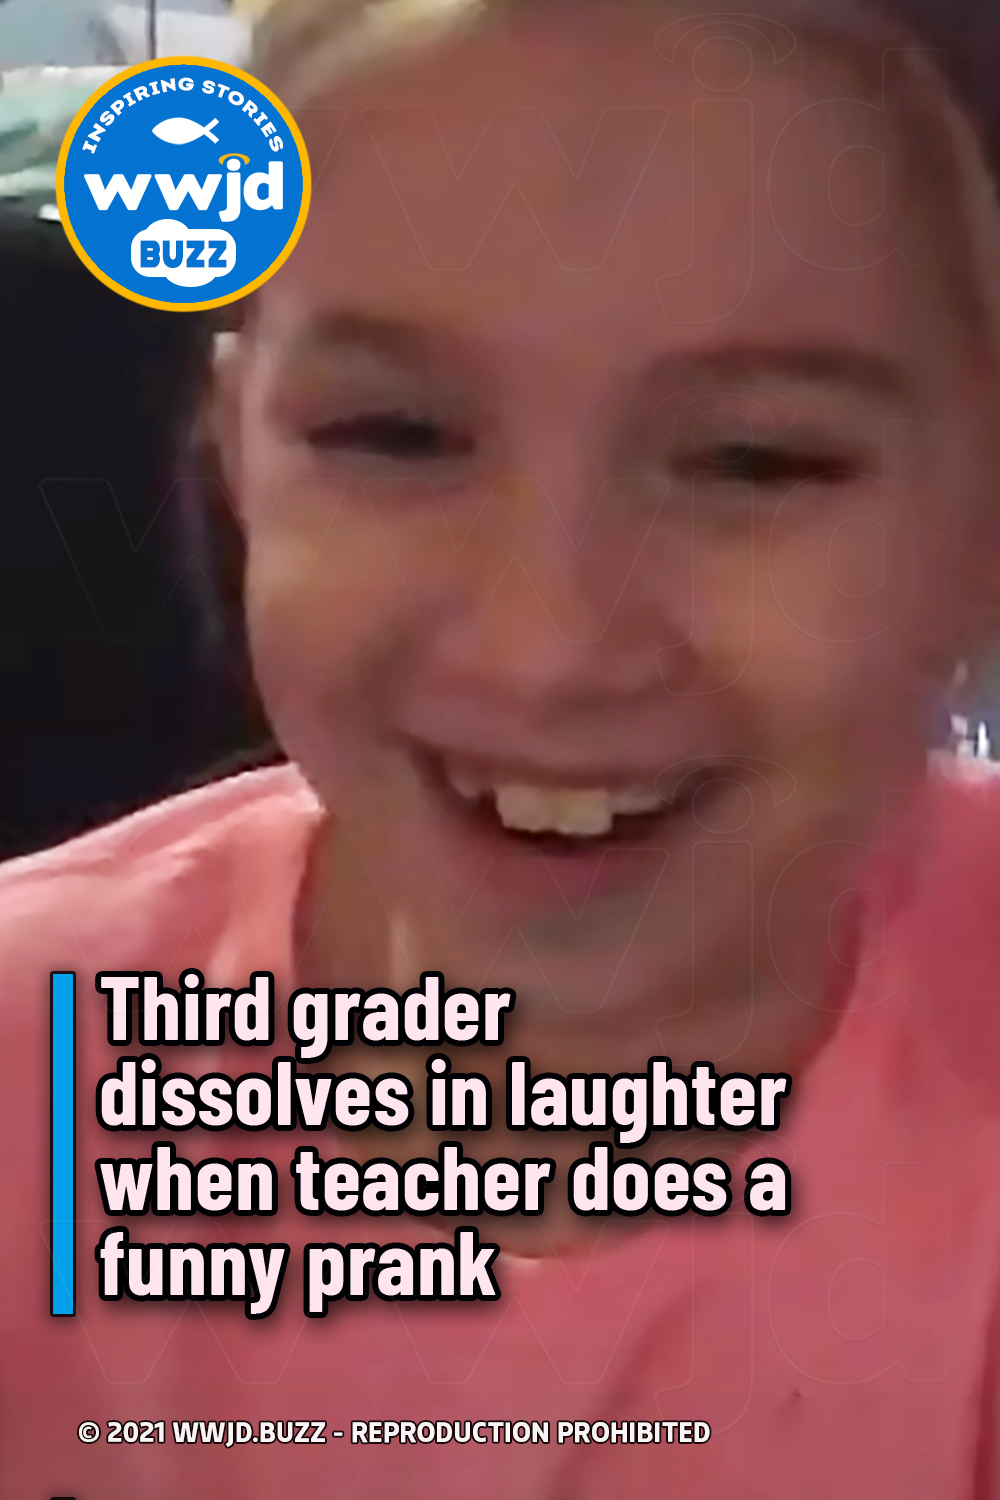 Third grader dissolves in laughter when teacher does a funny prank